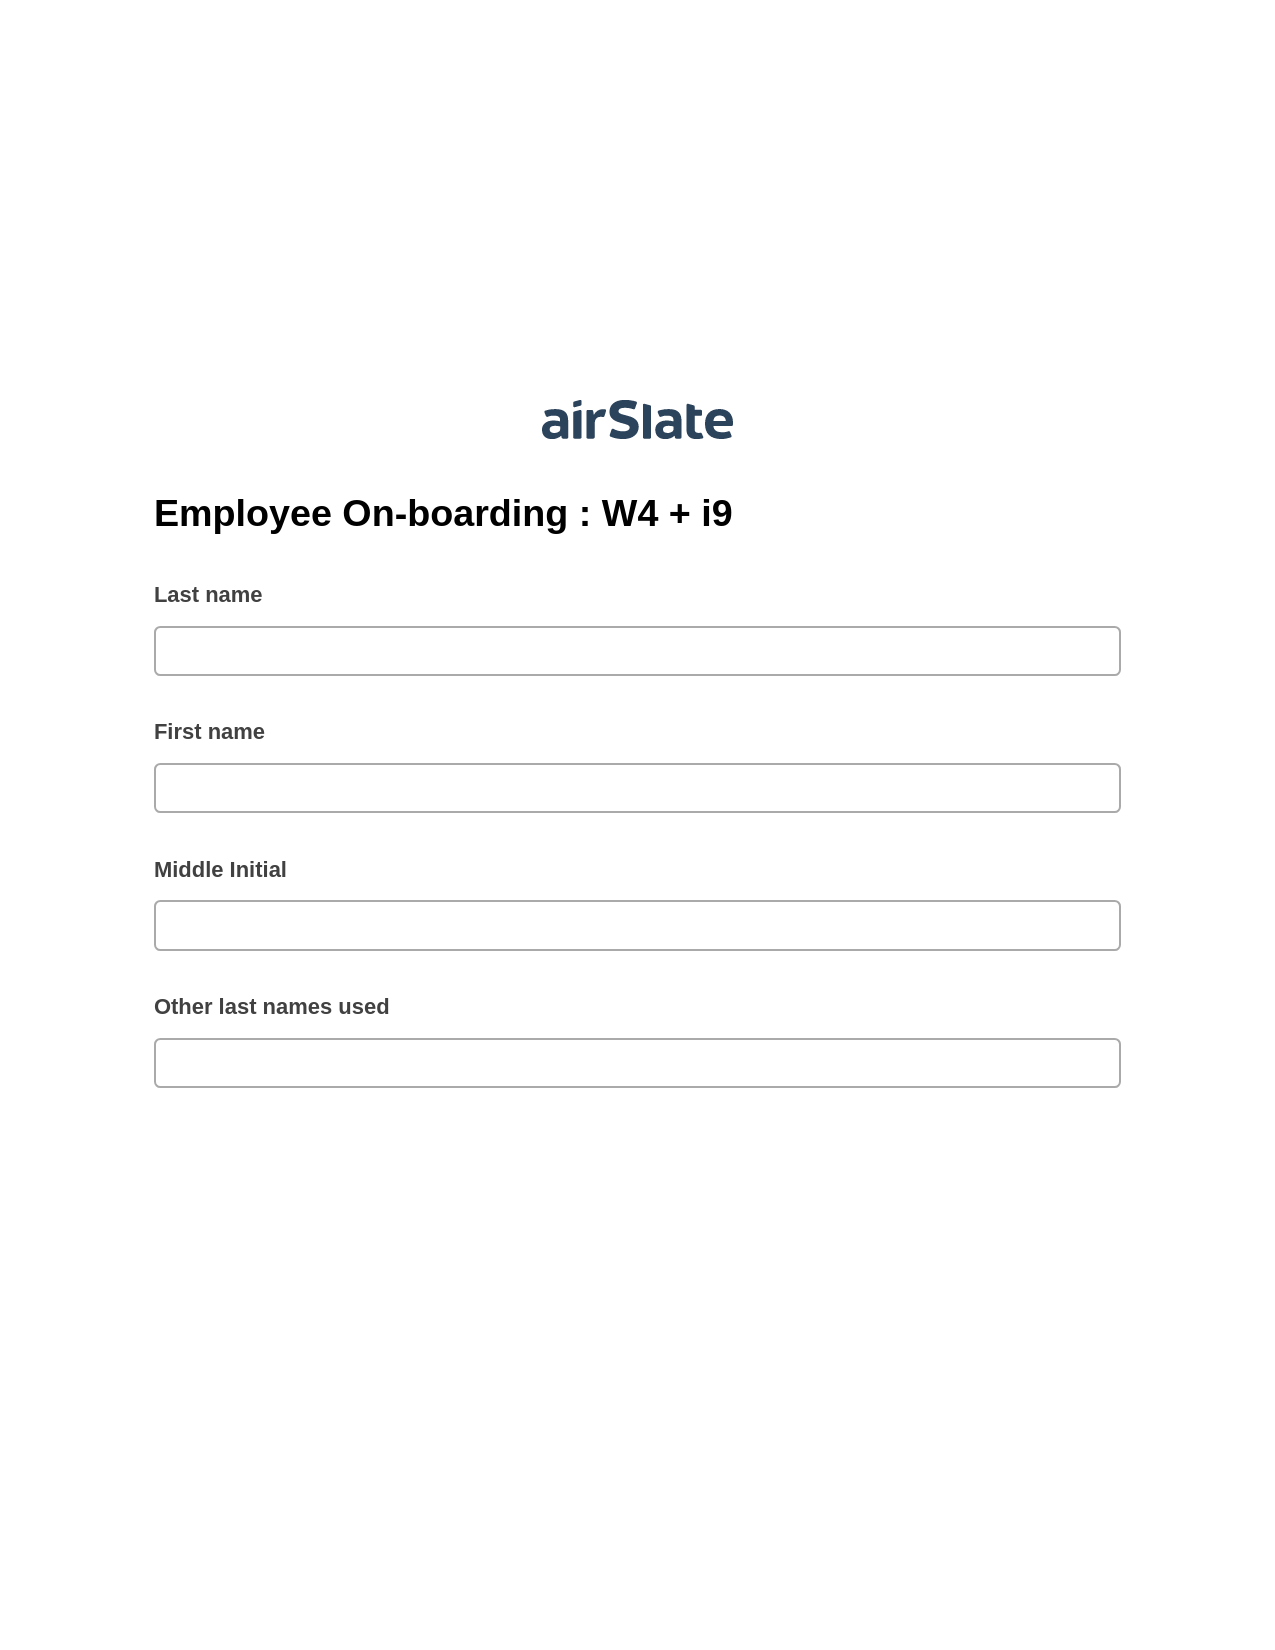 Employee On-boarding : W4 + i9 Pre-fill Dropdowns from Google Sheet Bot, SendGrid Send Campaign Bot, Export to NetSuite Bot